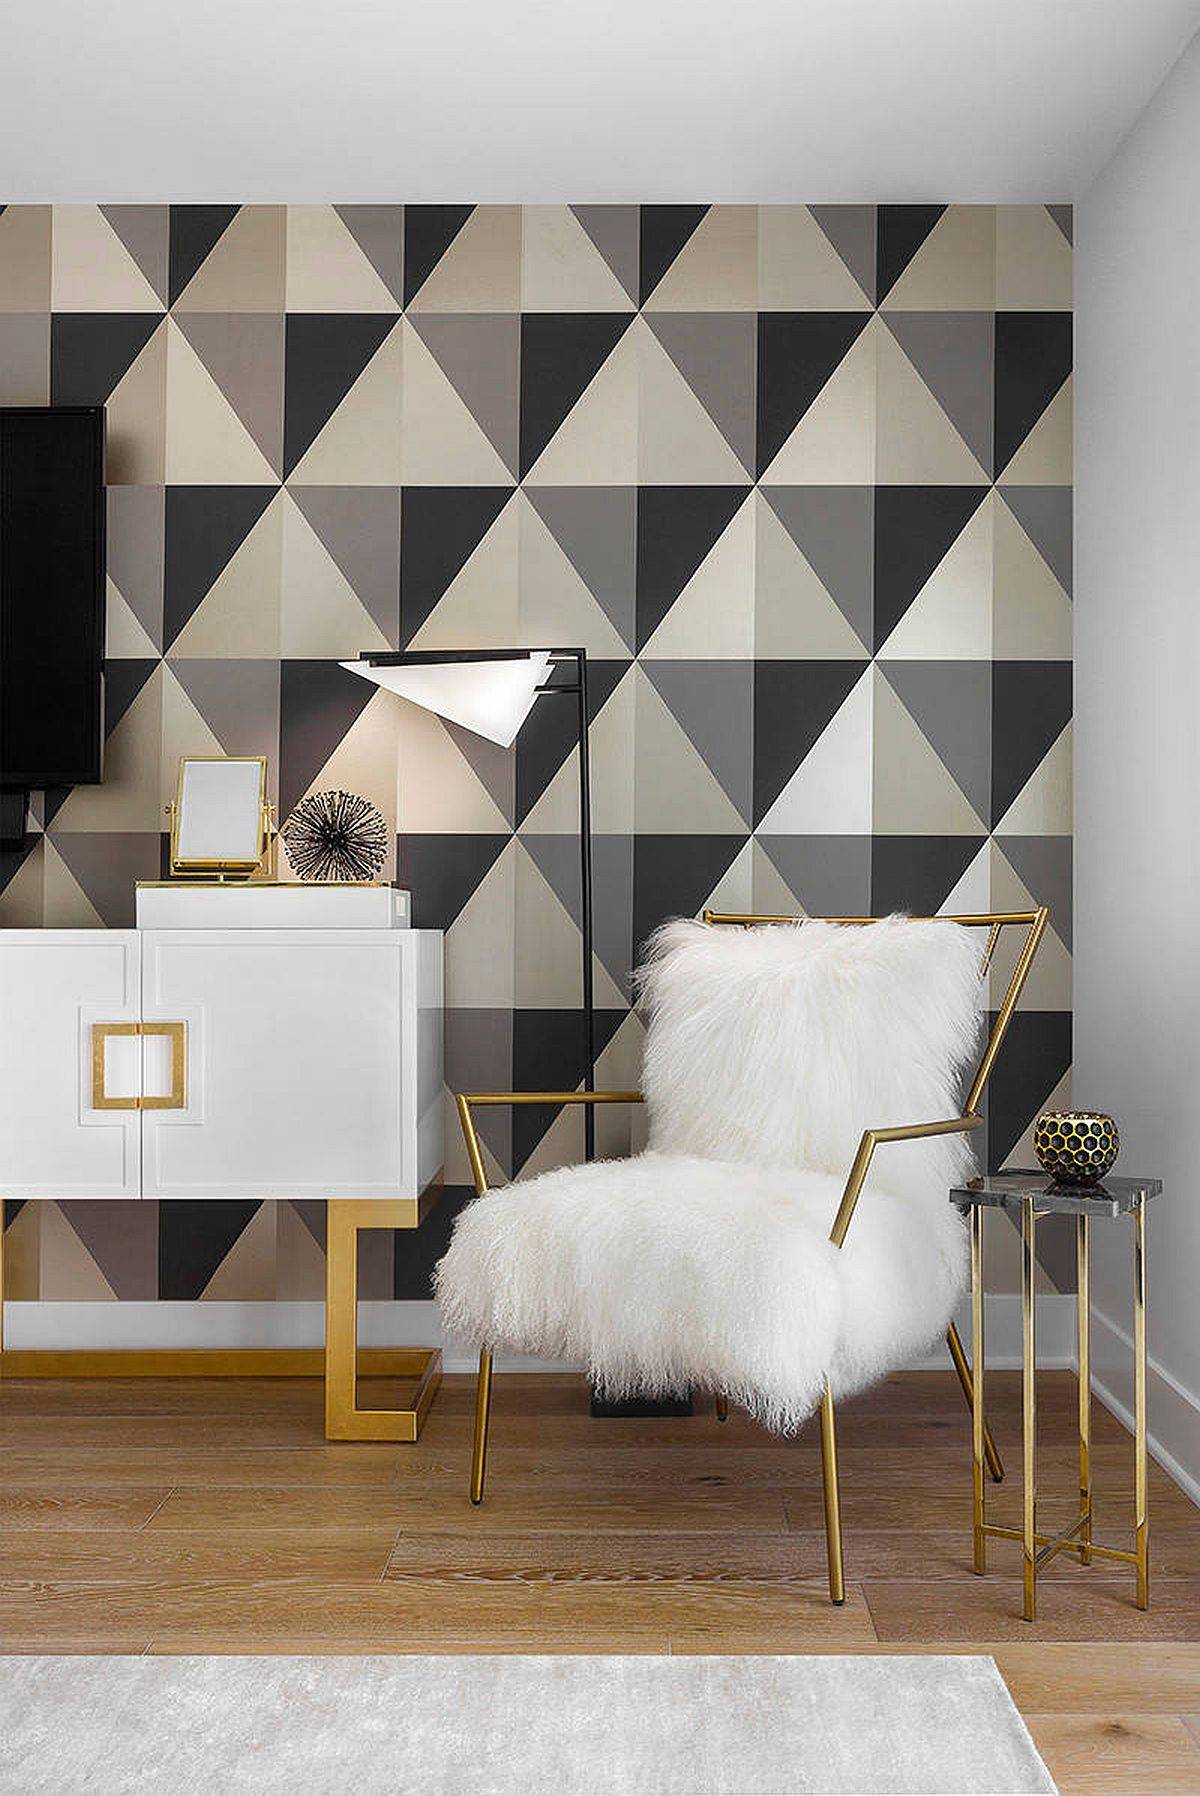 Tranistional-bedroom-with-white-black-and-gray-geometric-accent-wall-and-a-hint-of-Hollywood-glam-12227